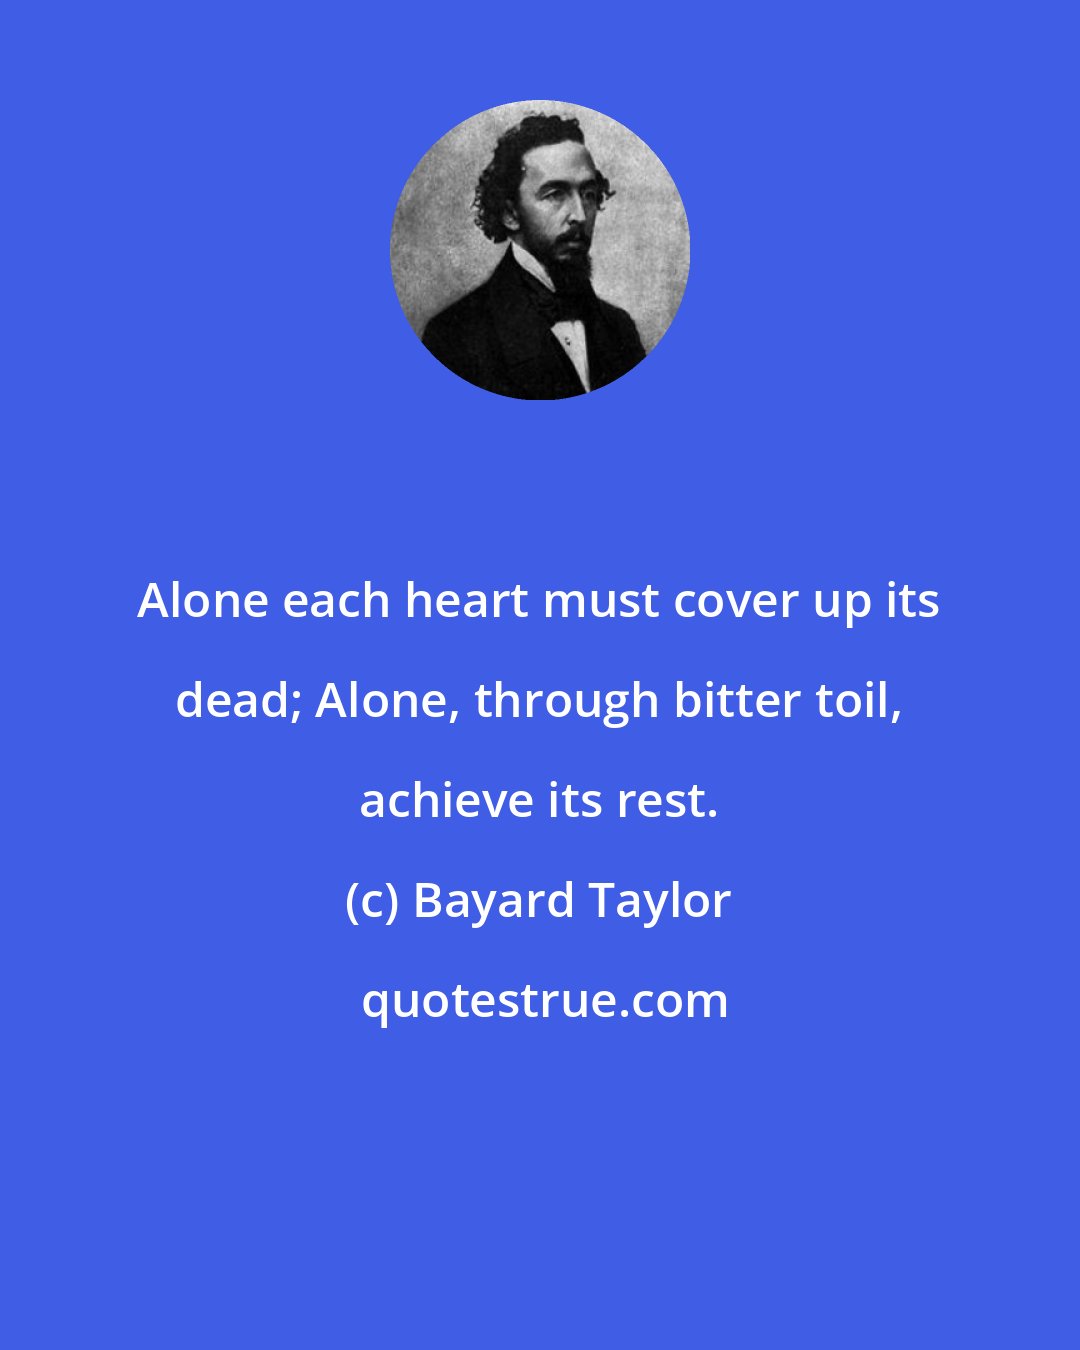 Bayard Taylor: Alone each heart must cover up its dead; Alone, through bitter toil, achieve its rest.